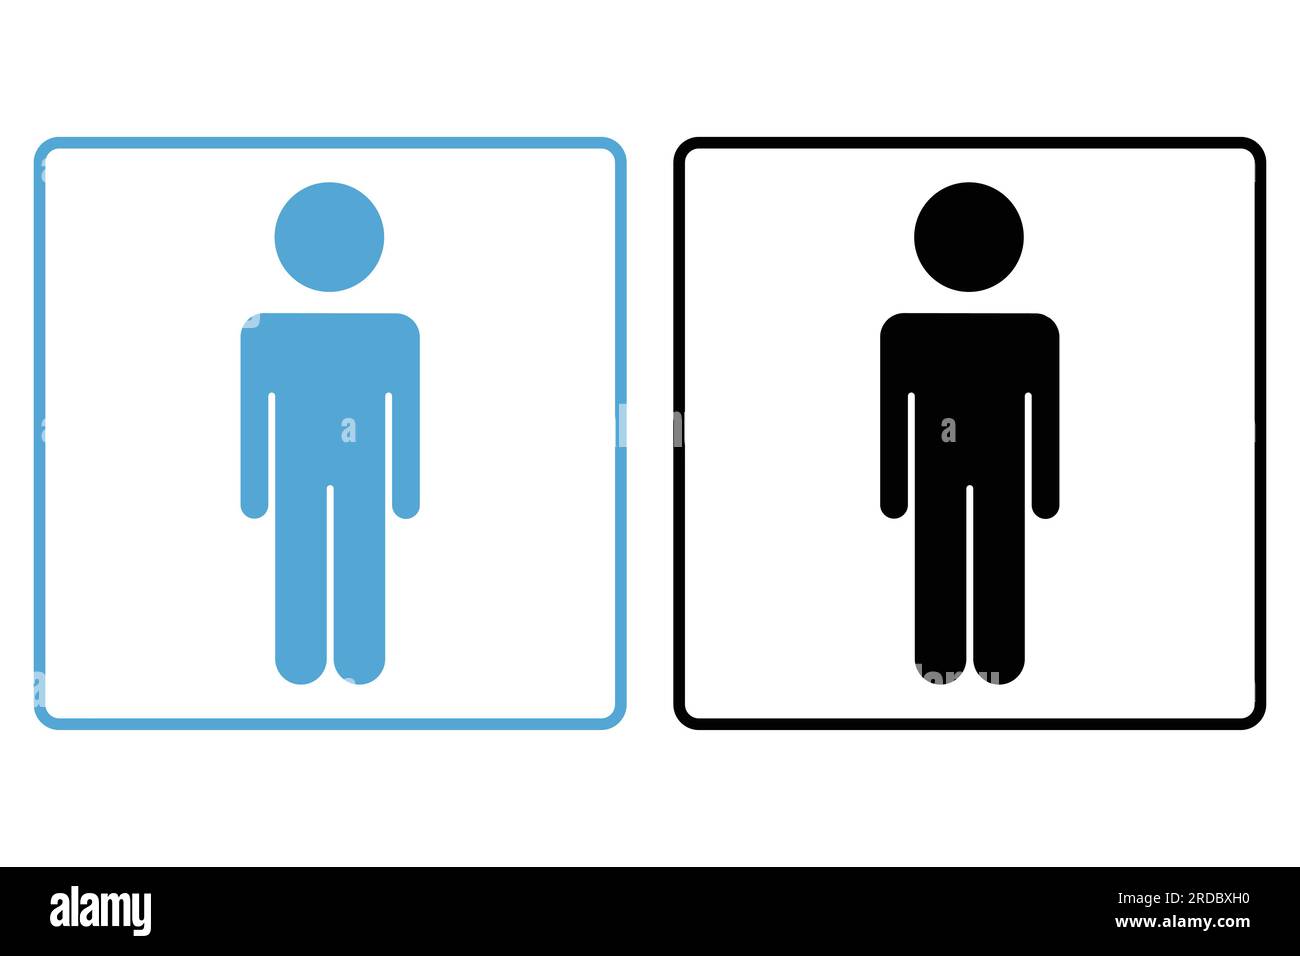 man icon. icon related to sign toilets, dressing room, bathroom. Solid icon style design. Simple vector design editable Stock Vector